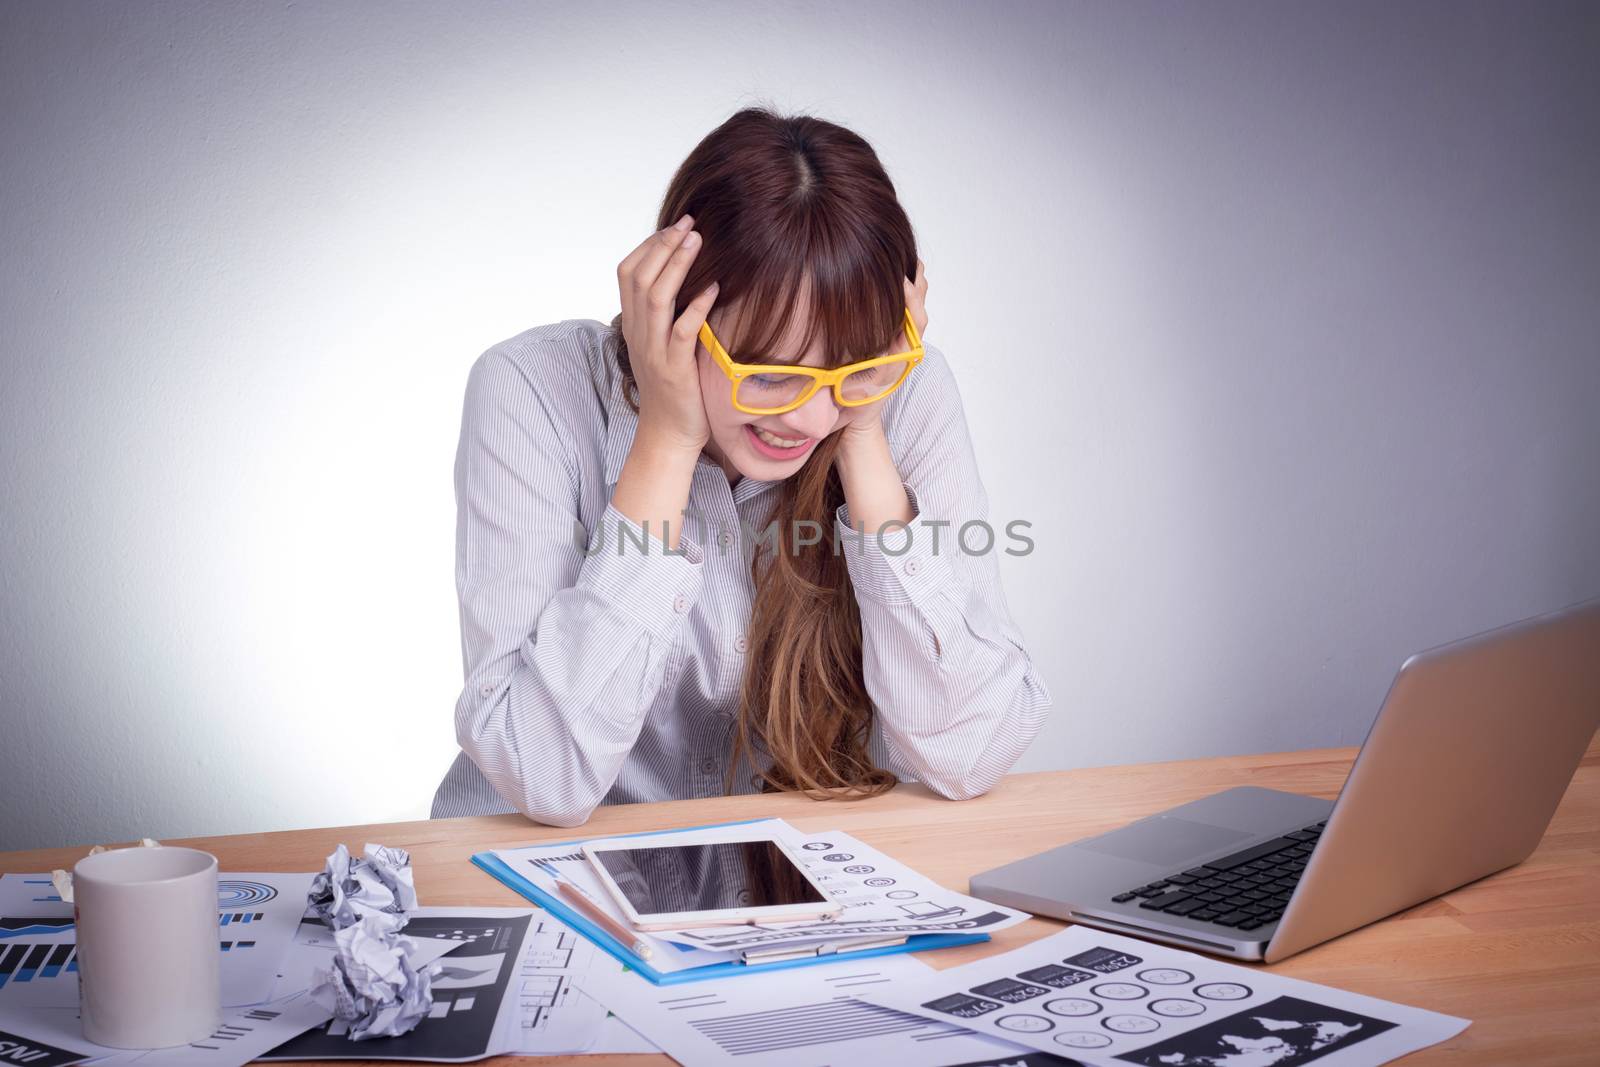 Feeling tired and stress. A stressed Asian business woman looks tired in her office